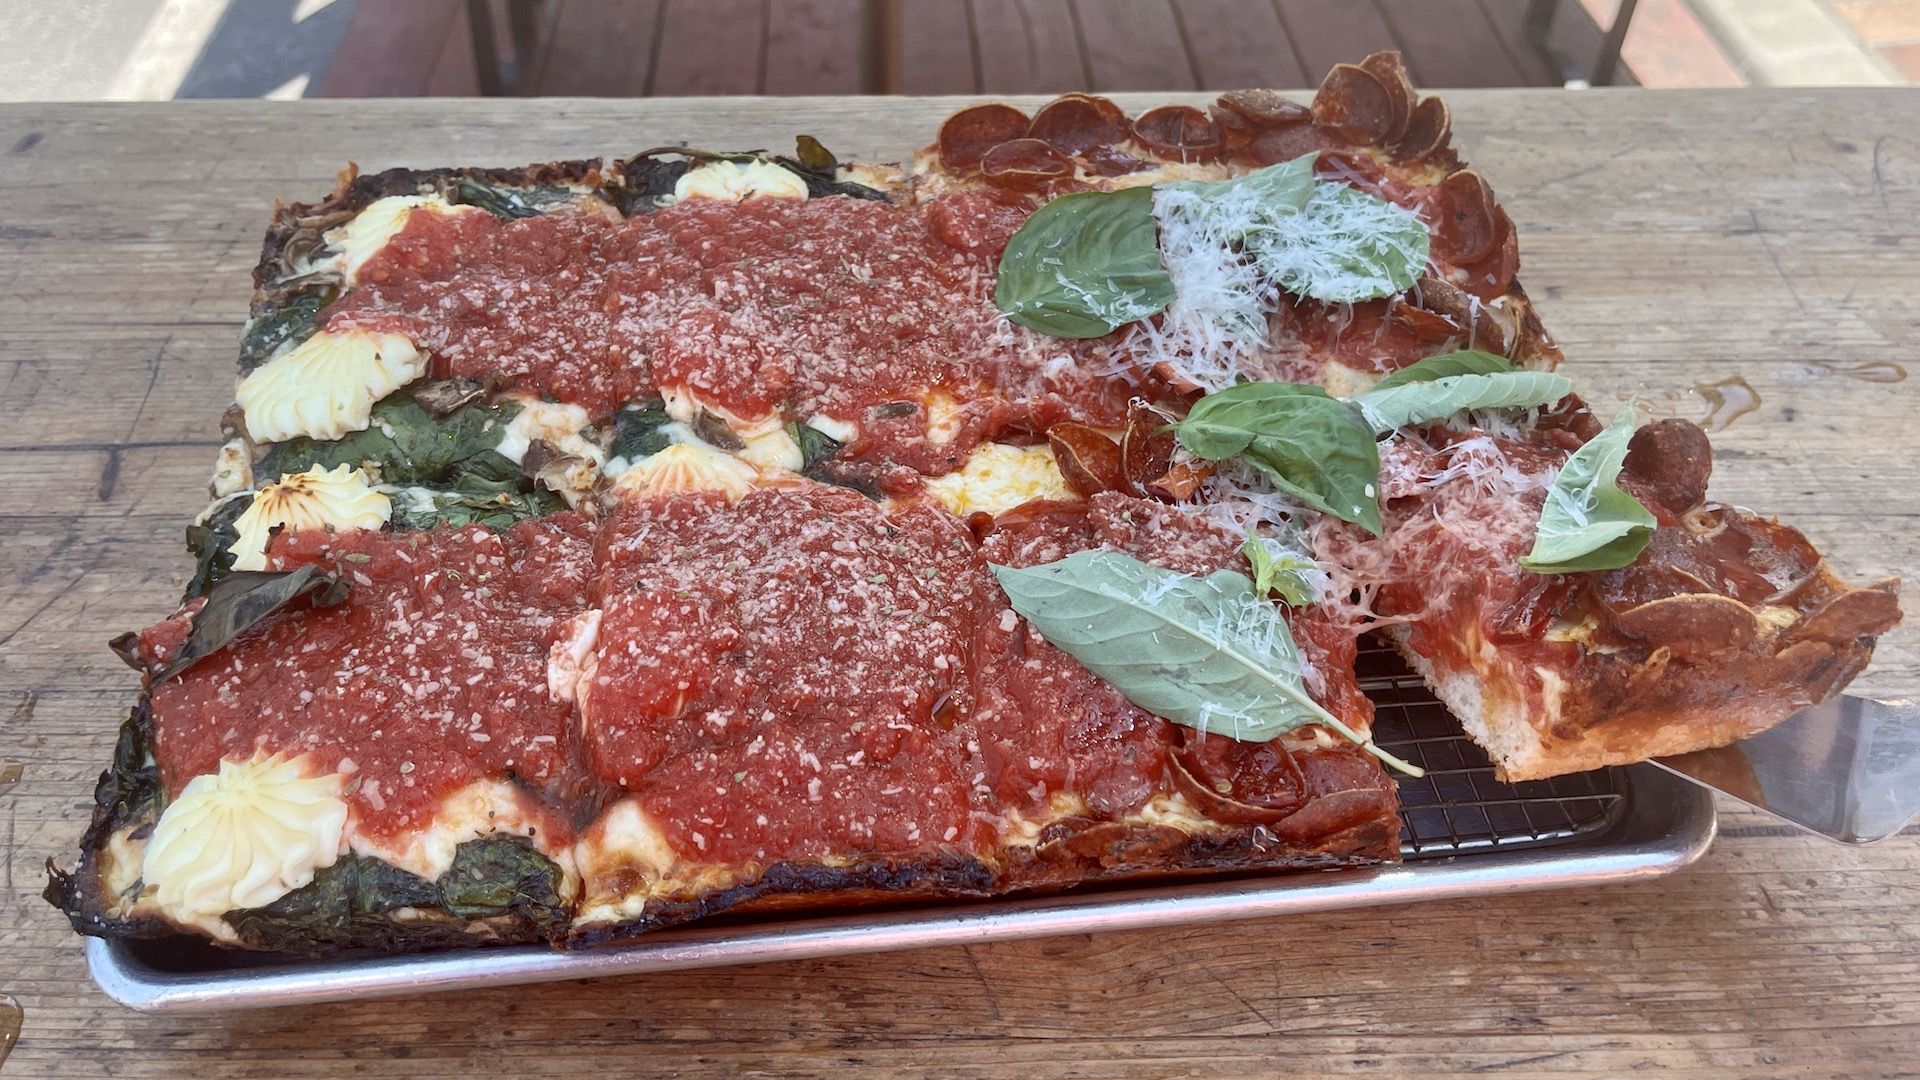 A detroit-style pizza with riccota, red sauce, pepperoni and fresh basil on a tray on a picnic table.